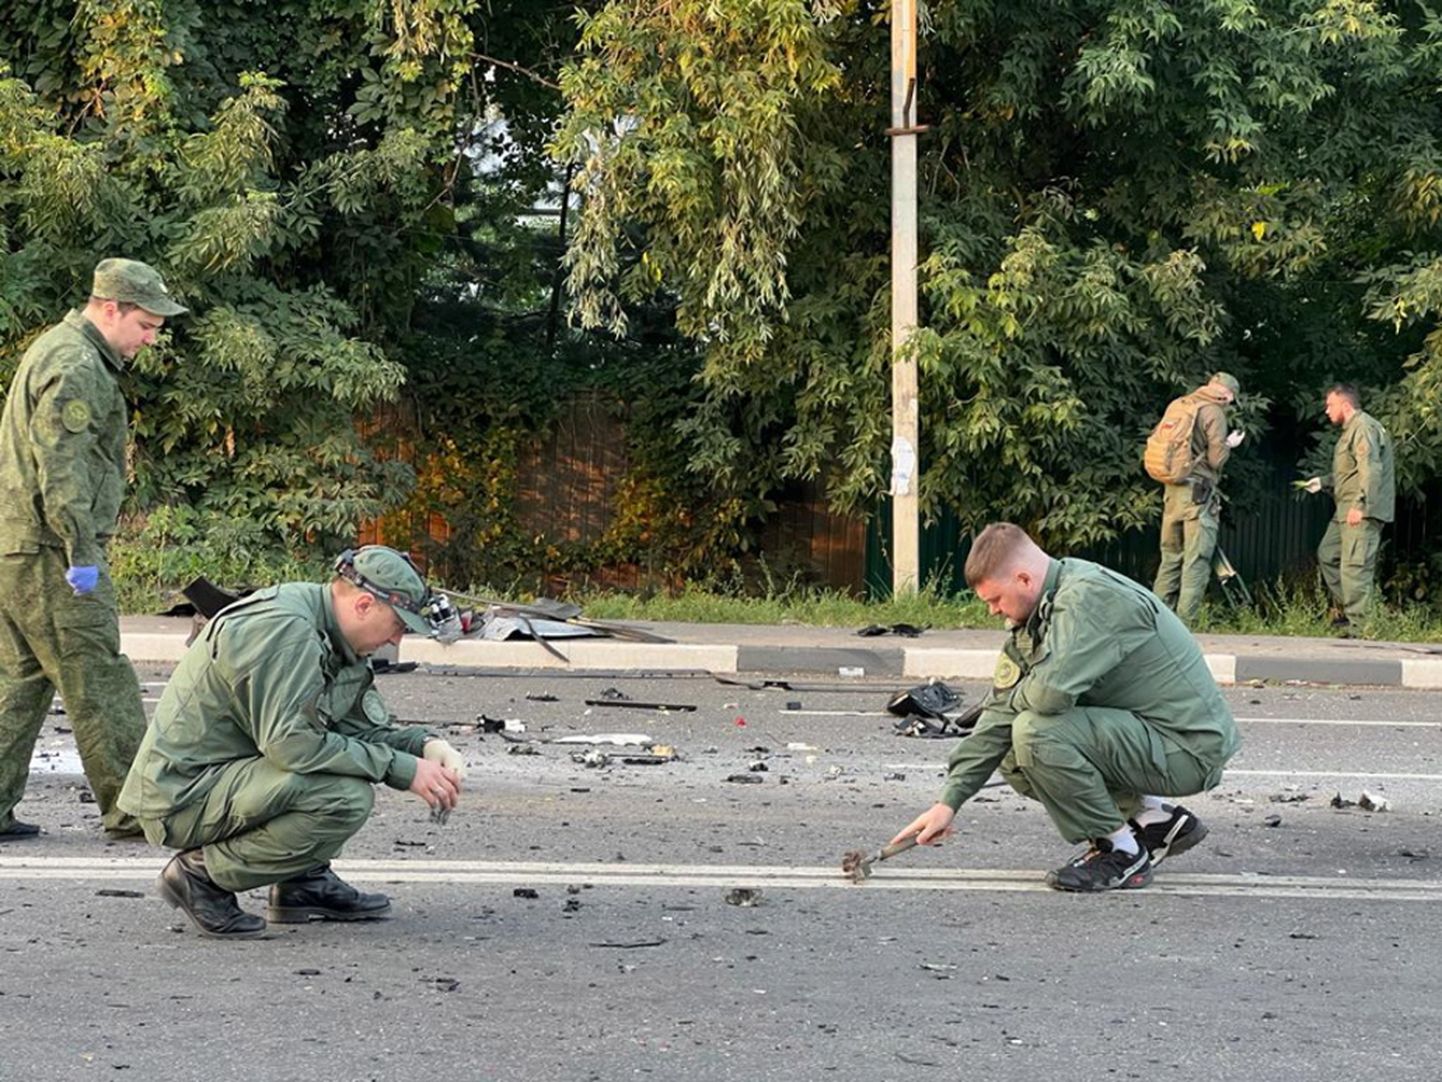 Investigators working at the scene of a car explosion on Mozhaisk highway near the village of Bolshiye Vyazemi in the Odintsovo urban district in Moscow region, Russia. In the evening of 20 August a Toyota Land Cruiser car blew up when the car was moving at full speed on a highway, and then burned. The driver Darya Dugina, the daughter of the philosopher Alexander Dugin, died on the spot.